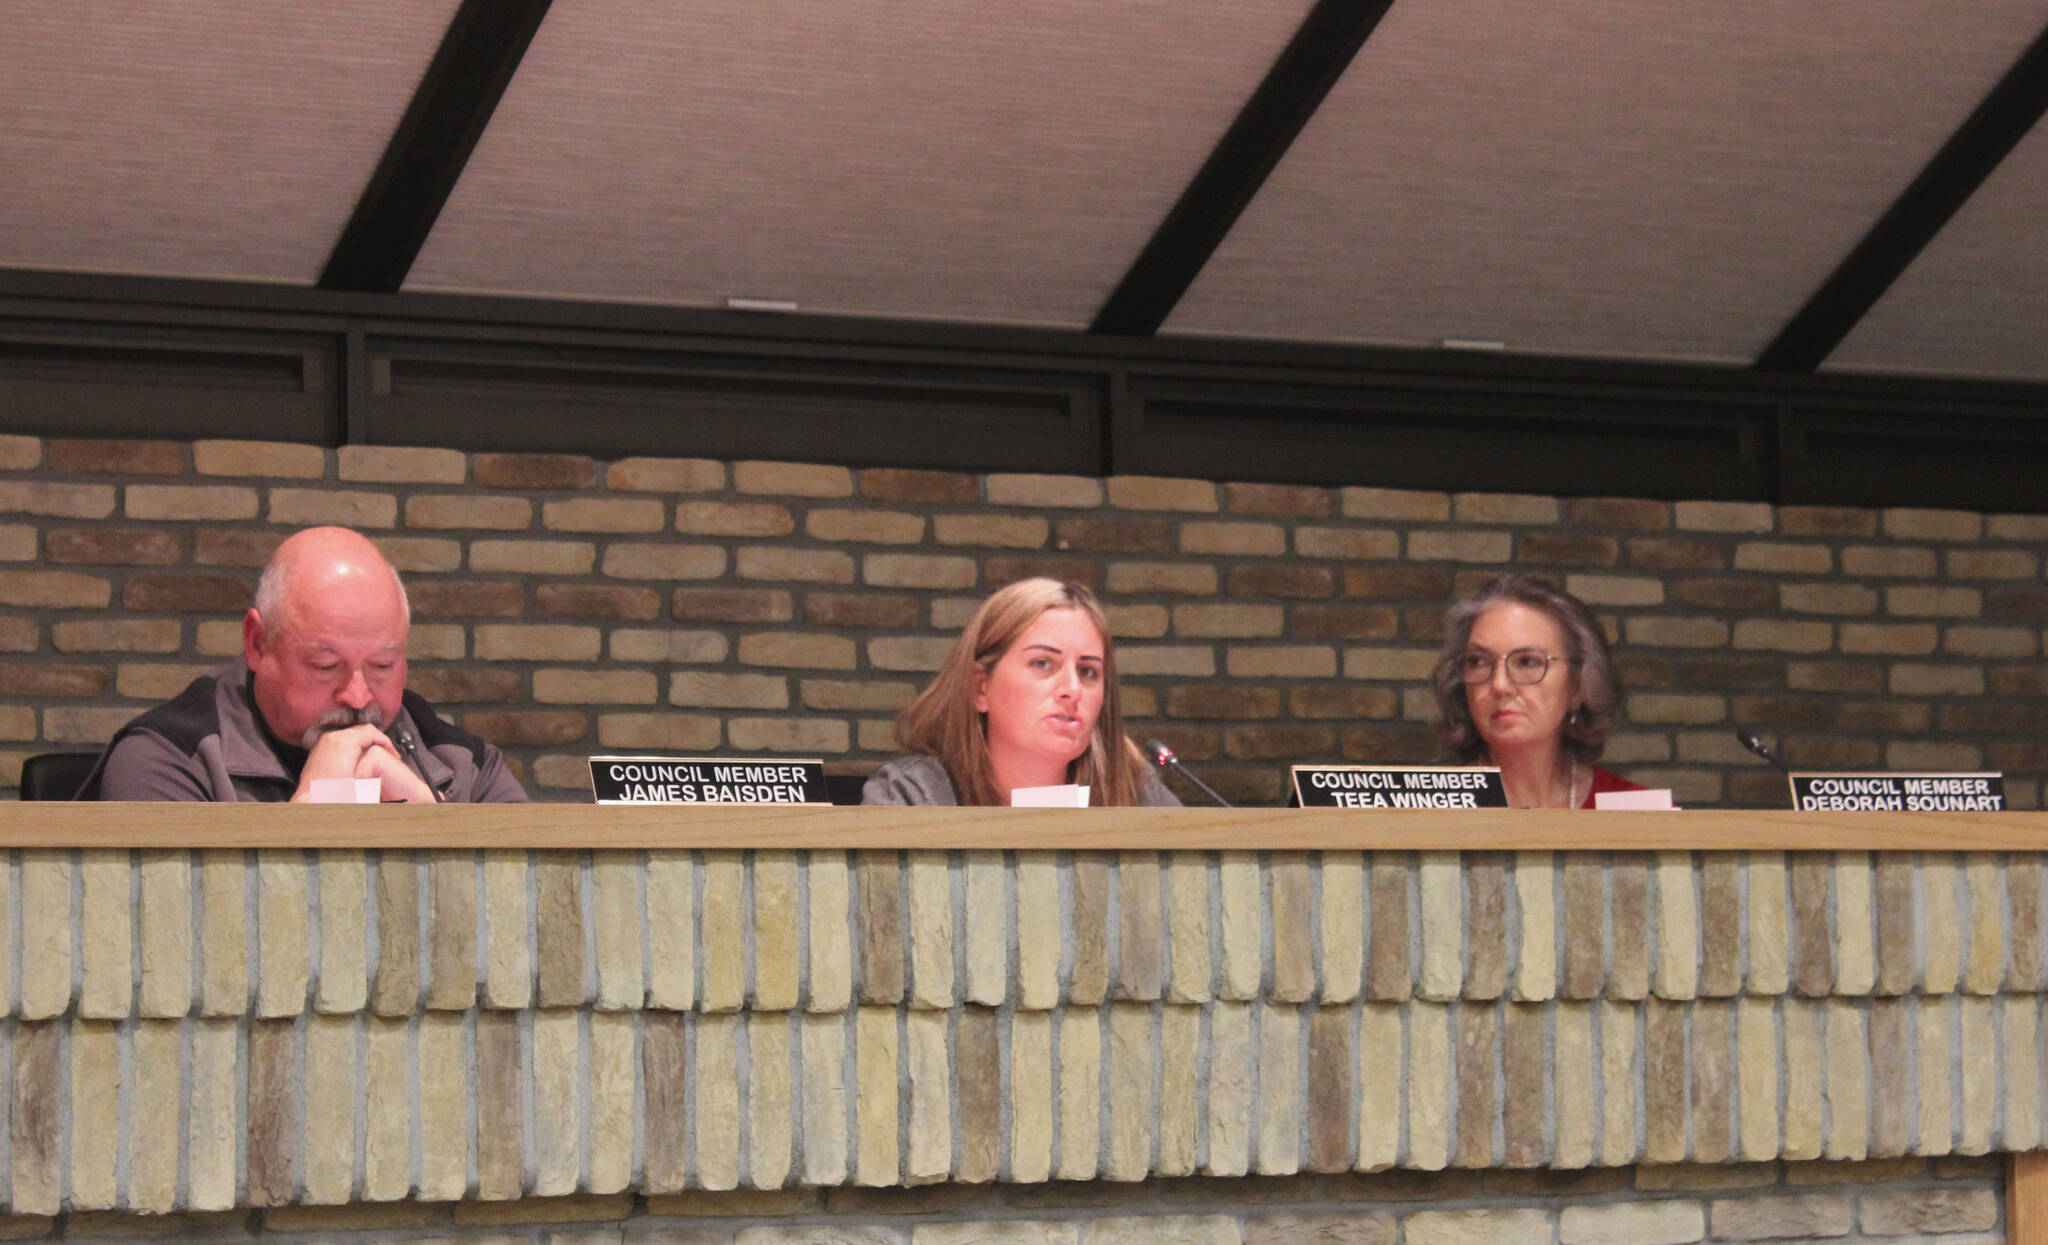 Kenai City Council members James Baisden (left) and Deborah Sounart (right) listen as member Teea Winger (center) speaks in support of legislation opposing government COVID-19 mandates, during a meeting of the Kenai City Council last Wednesday, in Kenai.